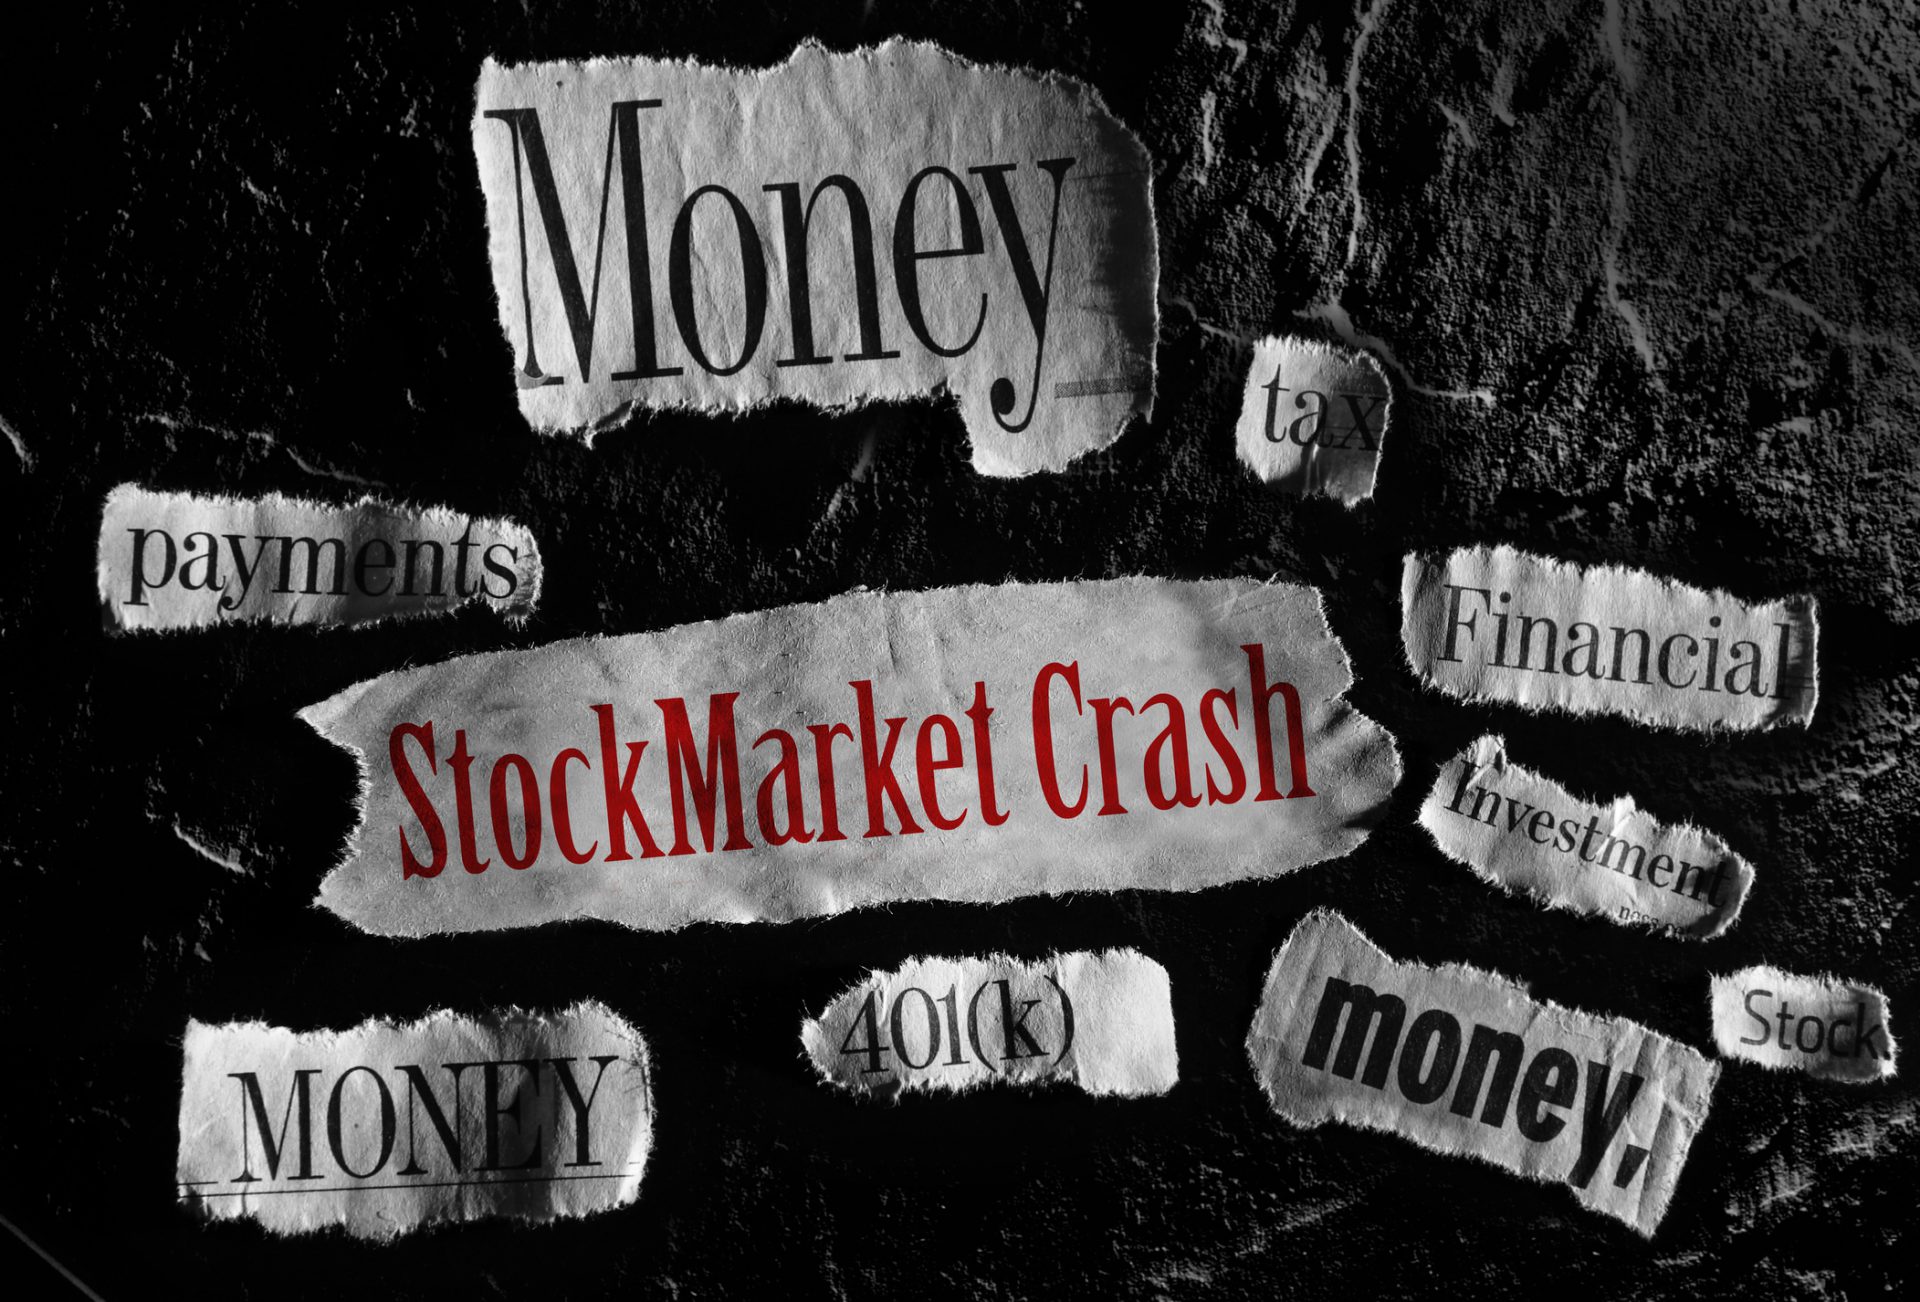 Financial related news items with Stock Market Crash headline